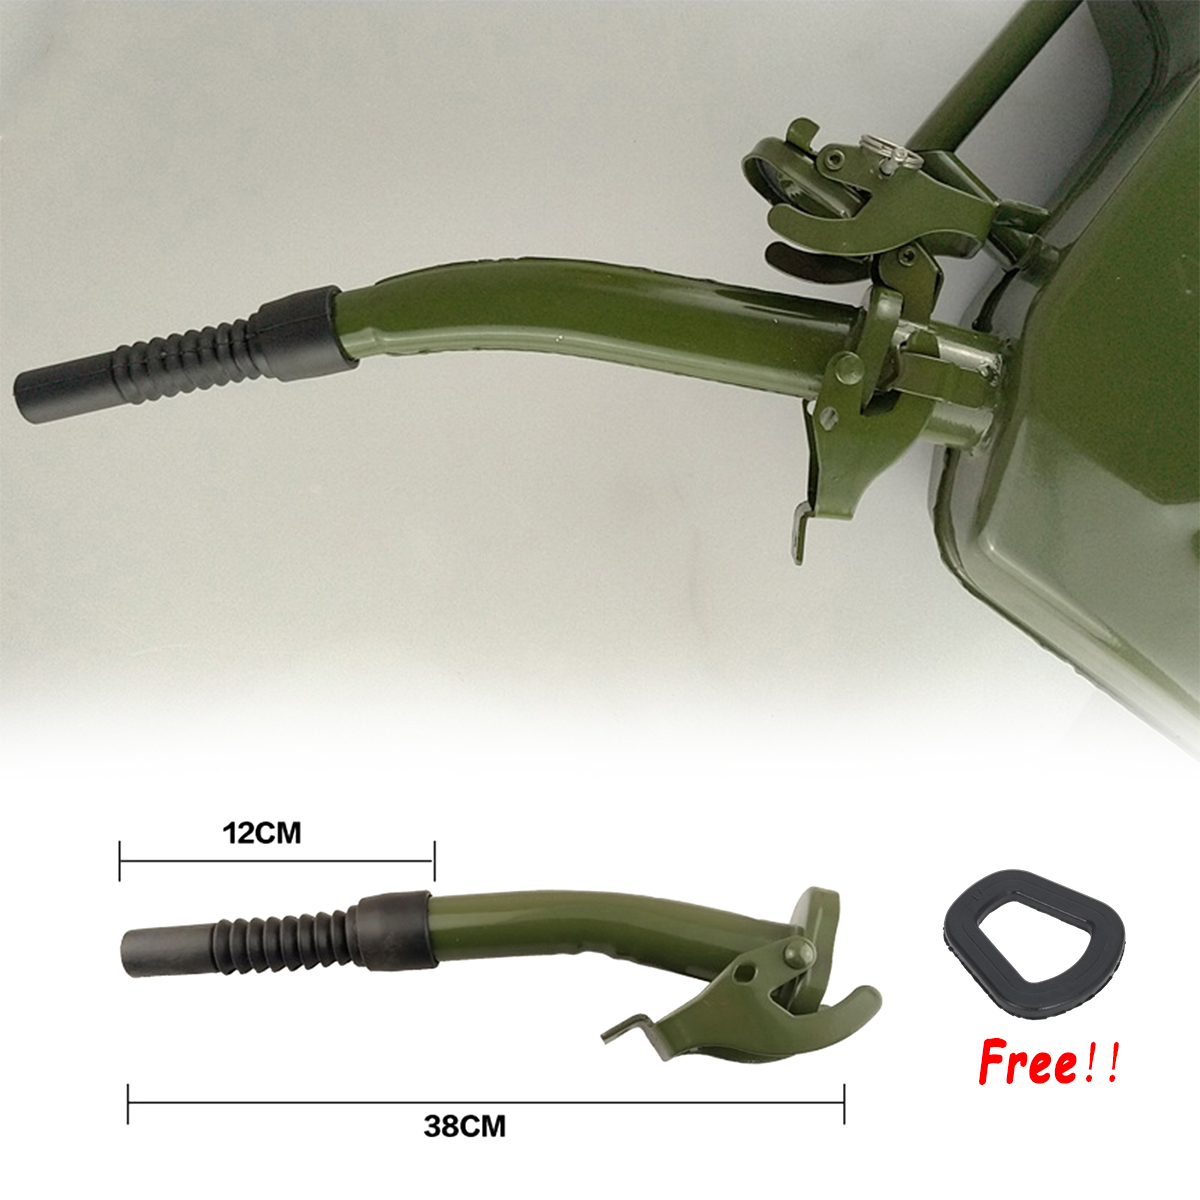 Black-Metal-Jerry-Can-Gas-Canister-Rubber-Nozzle-Spout-Military-Style-Clamp-20L-1600813-2